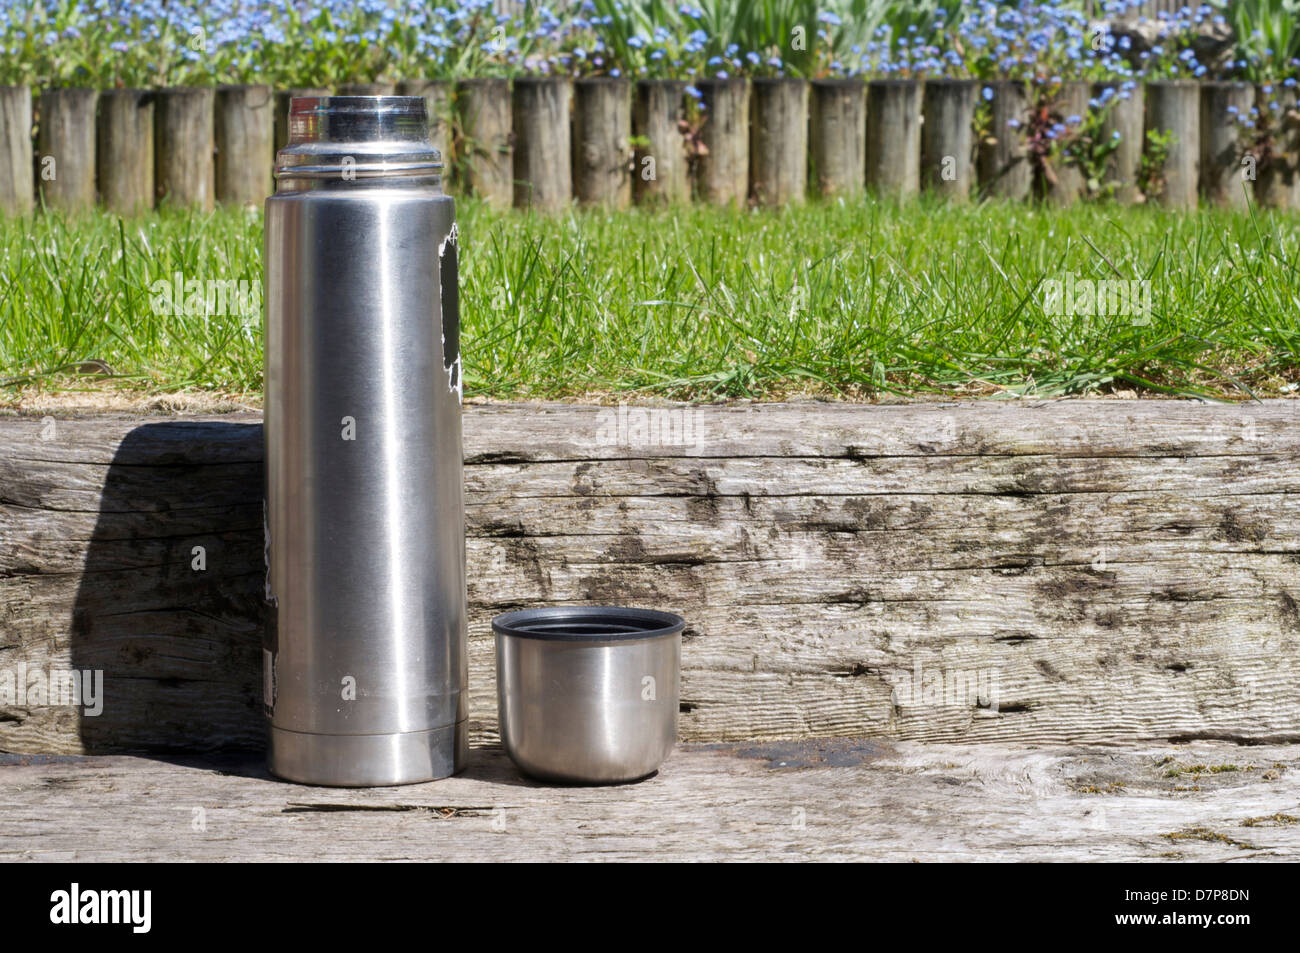 1,545 Pouring Coffee Tea Thermos Hiking Images, Stock Photos, 3D